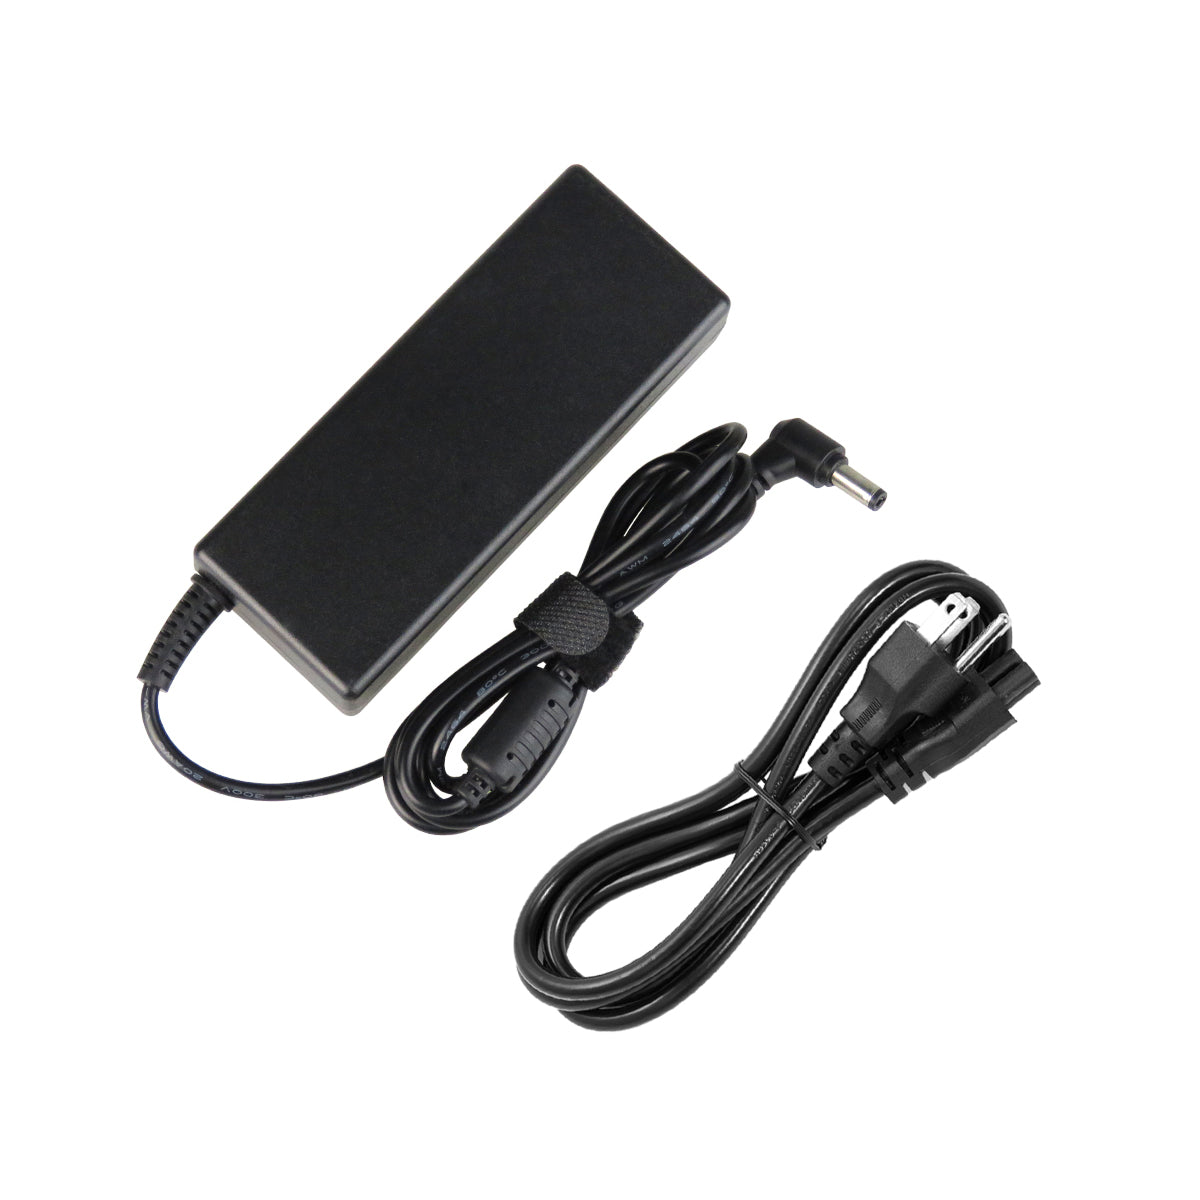 AC Adapter Charger for ASUS G53 Notebook.